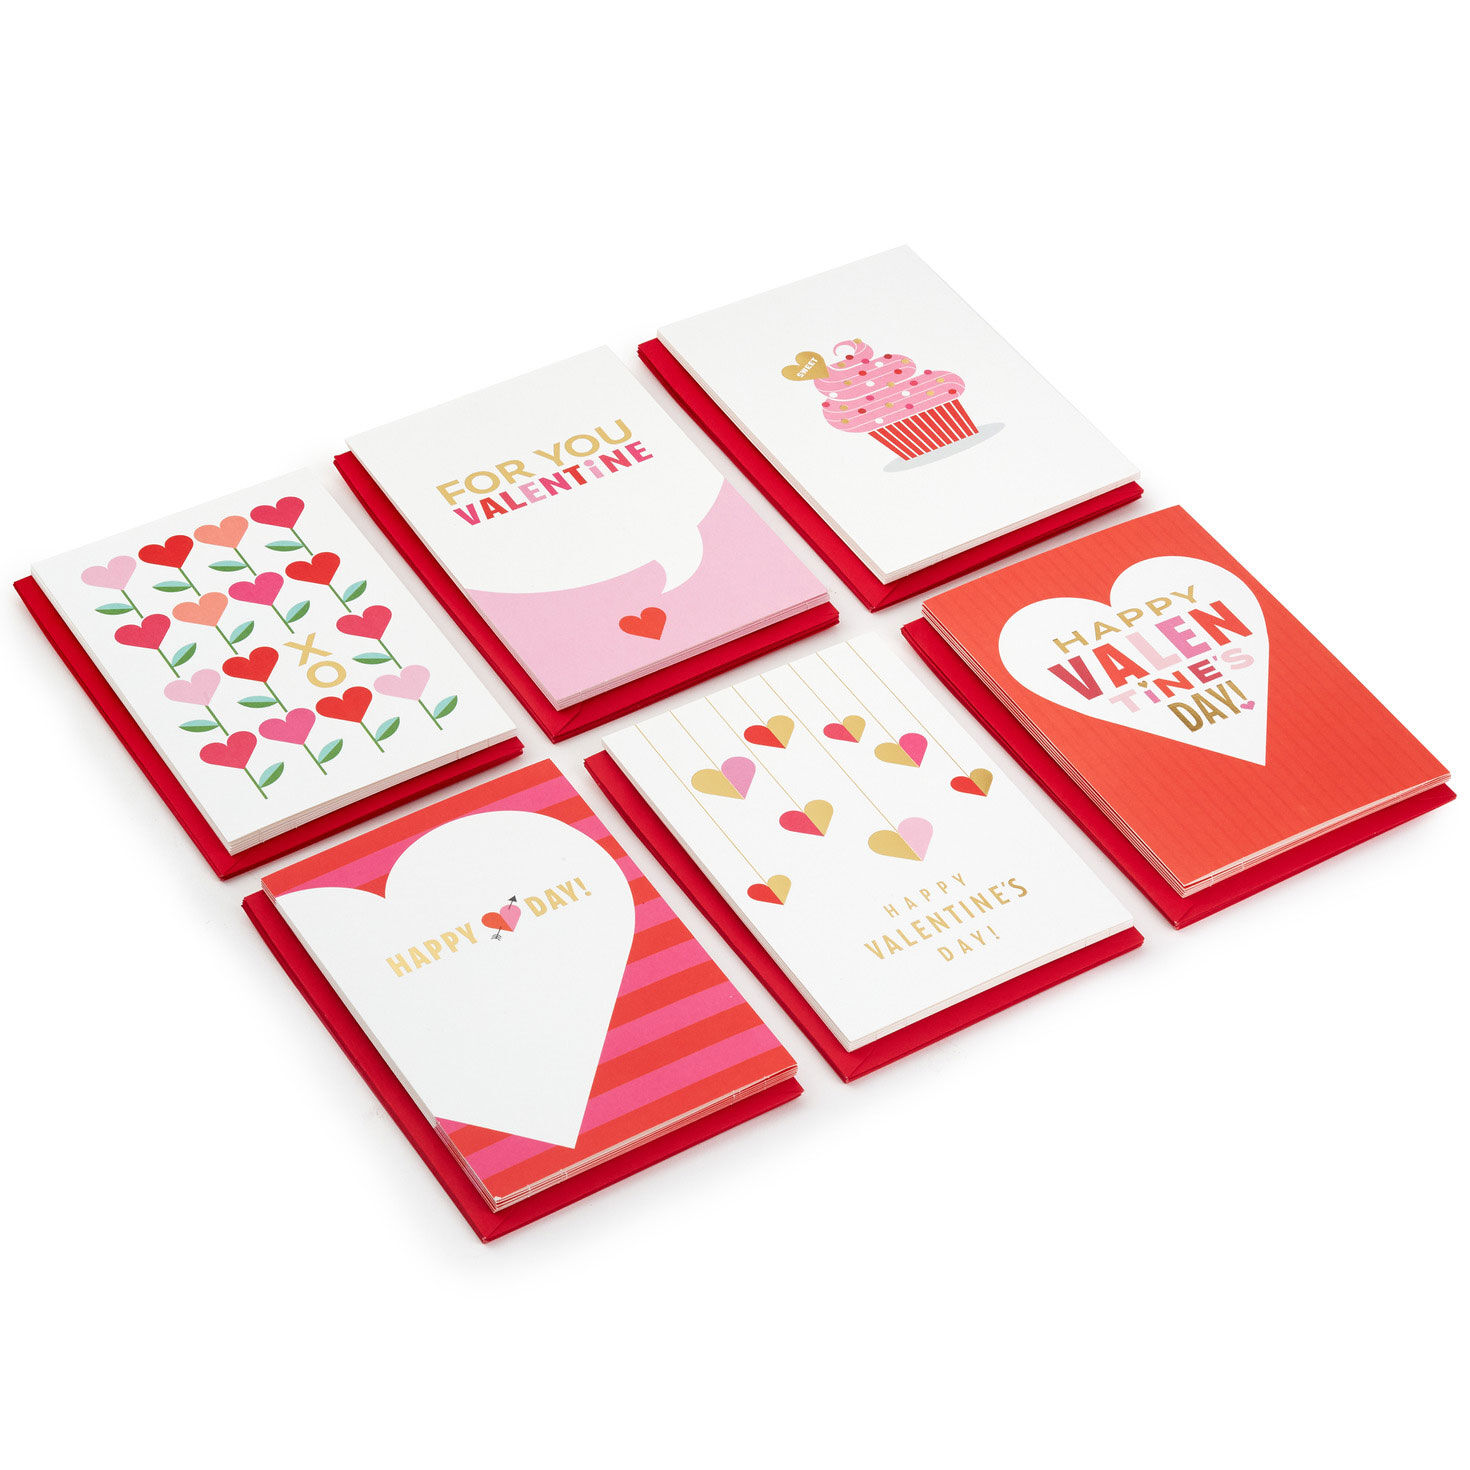 Modern Hearts Boxed Valentine's Day Cards, Pack of 36 for only USD 18.99 | Hallmark